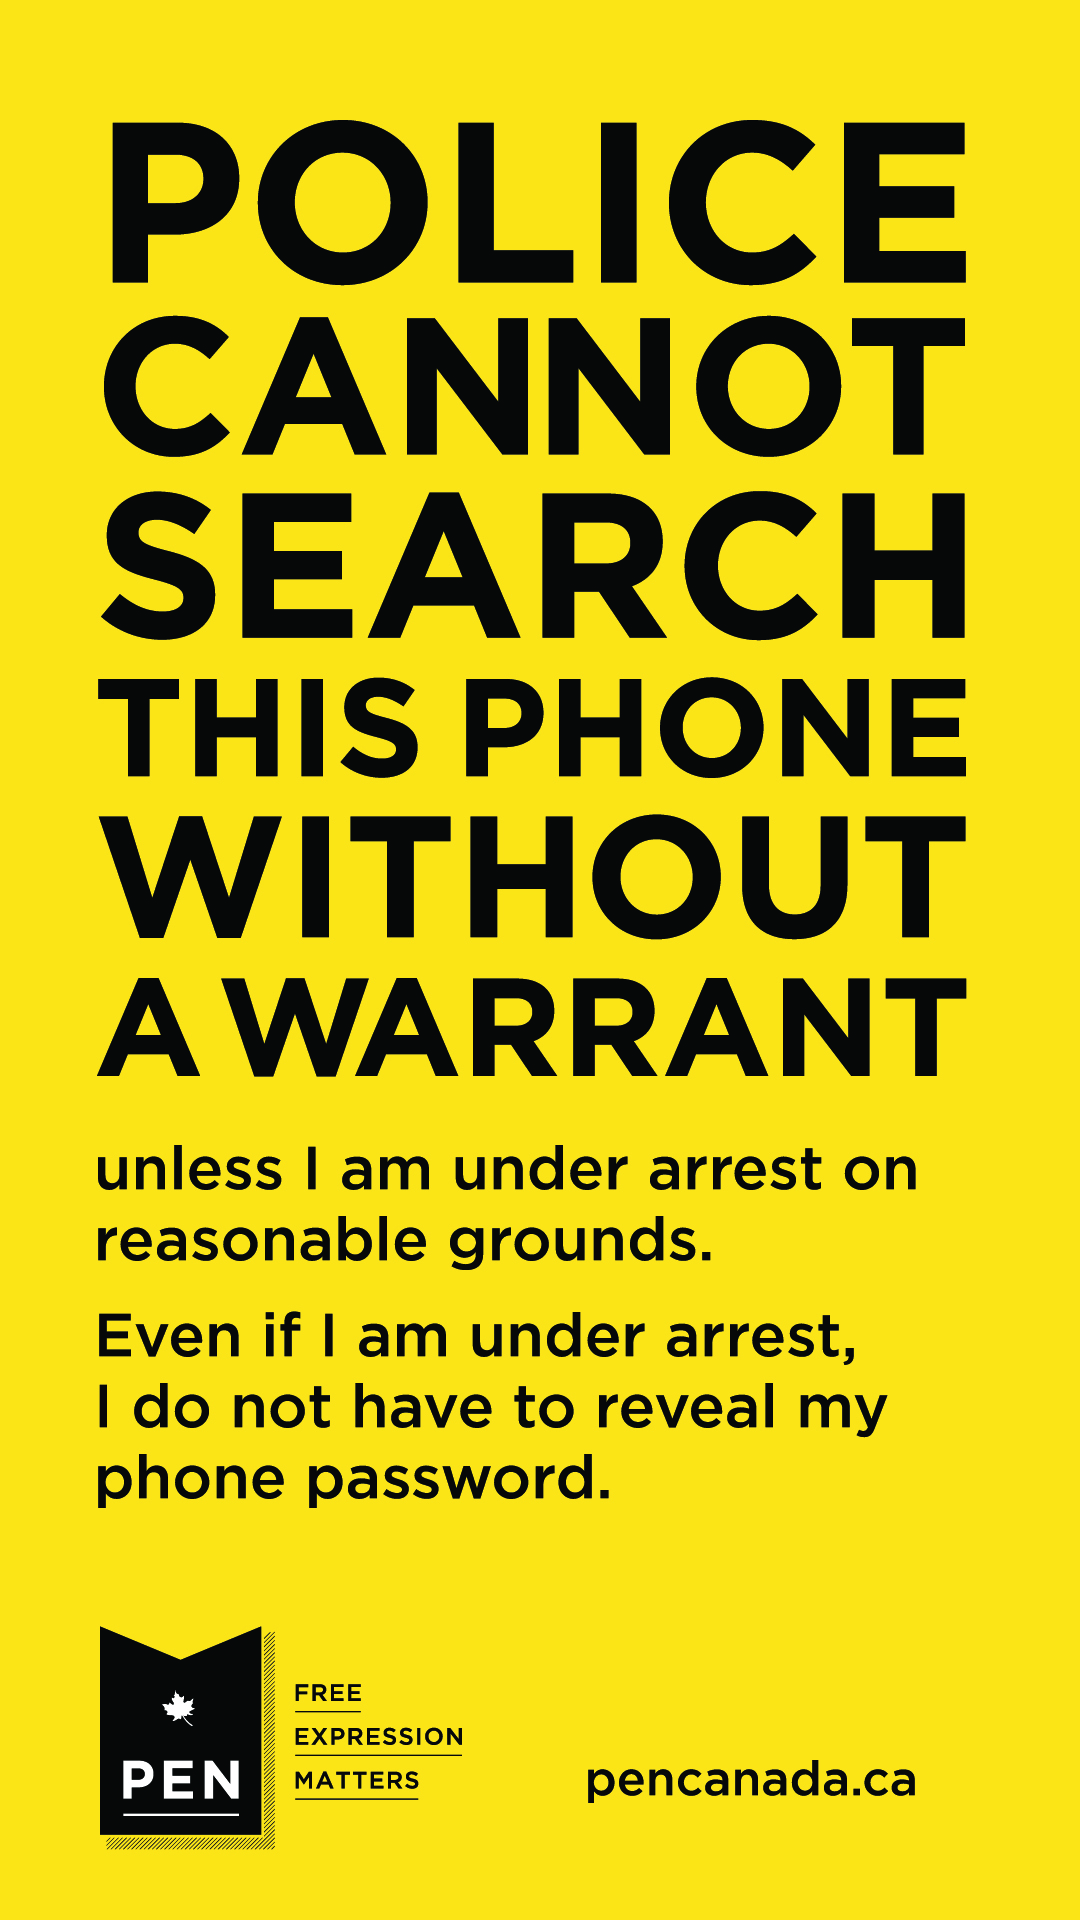 Can the Police Search my Phone?